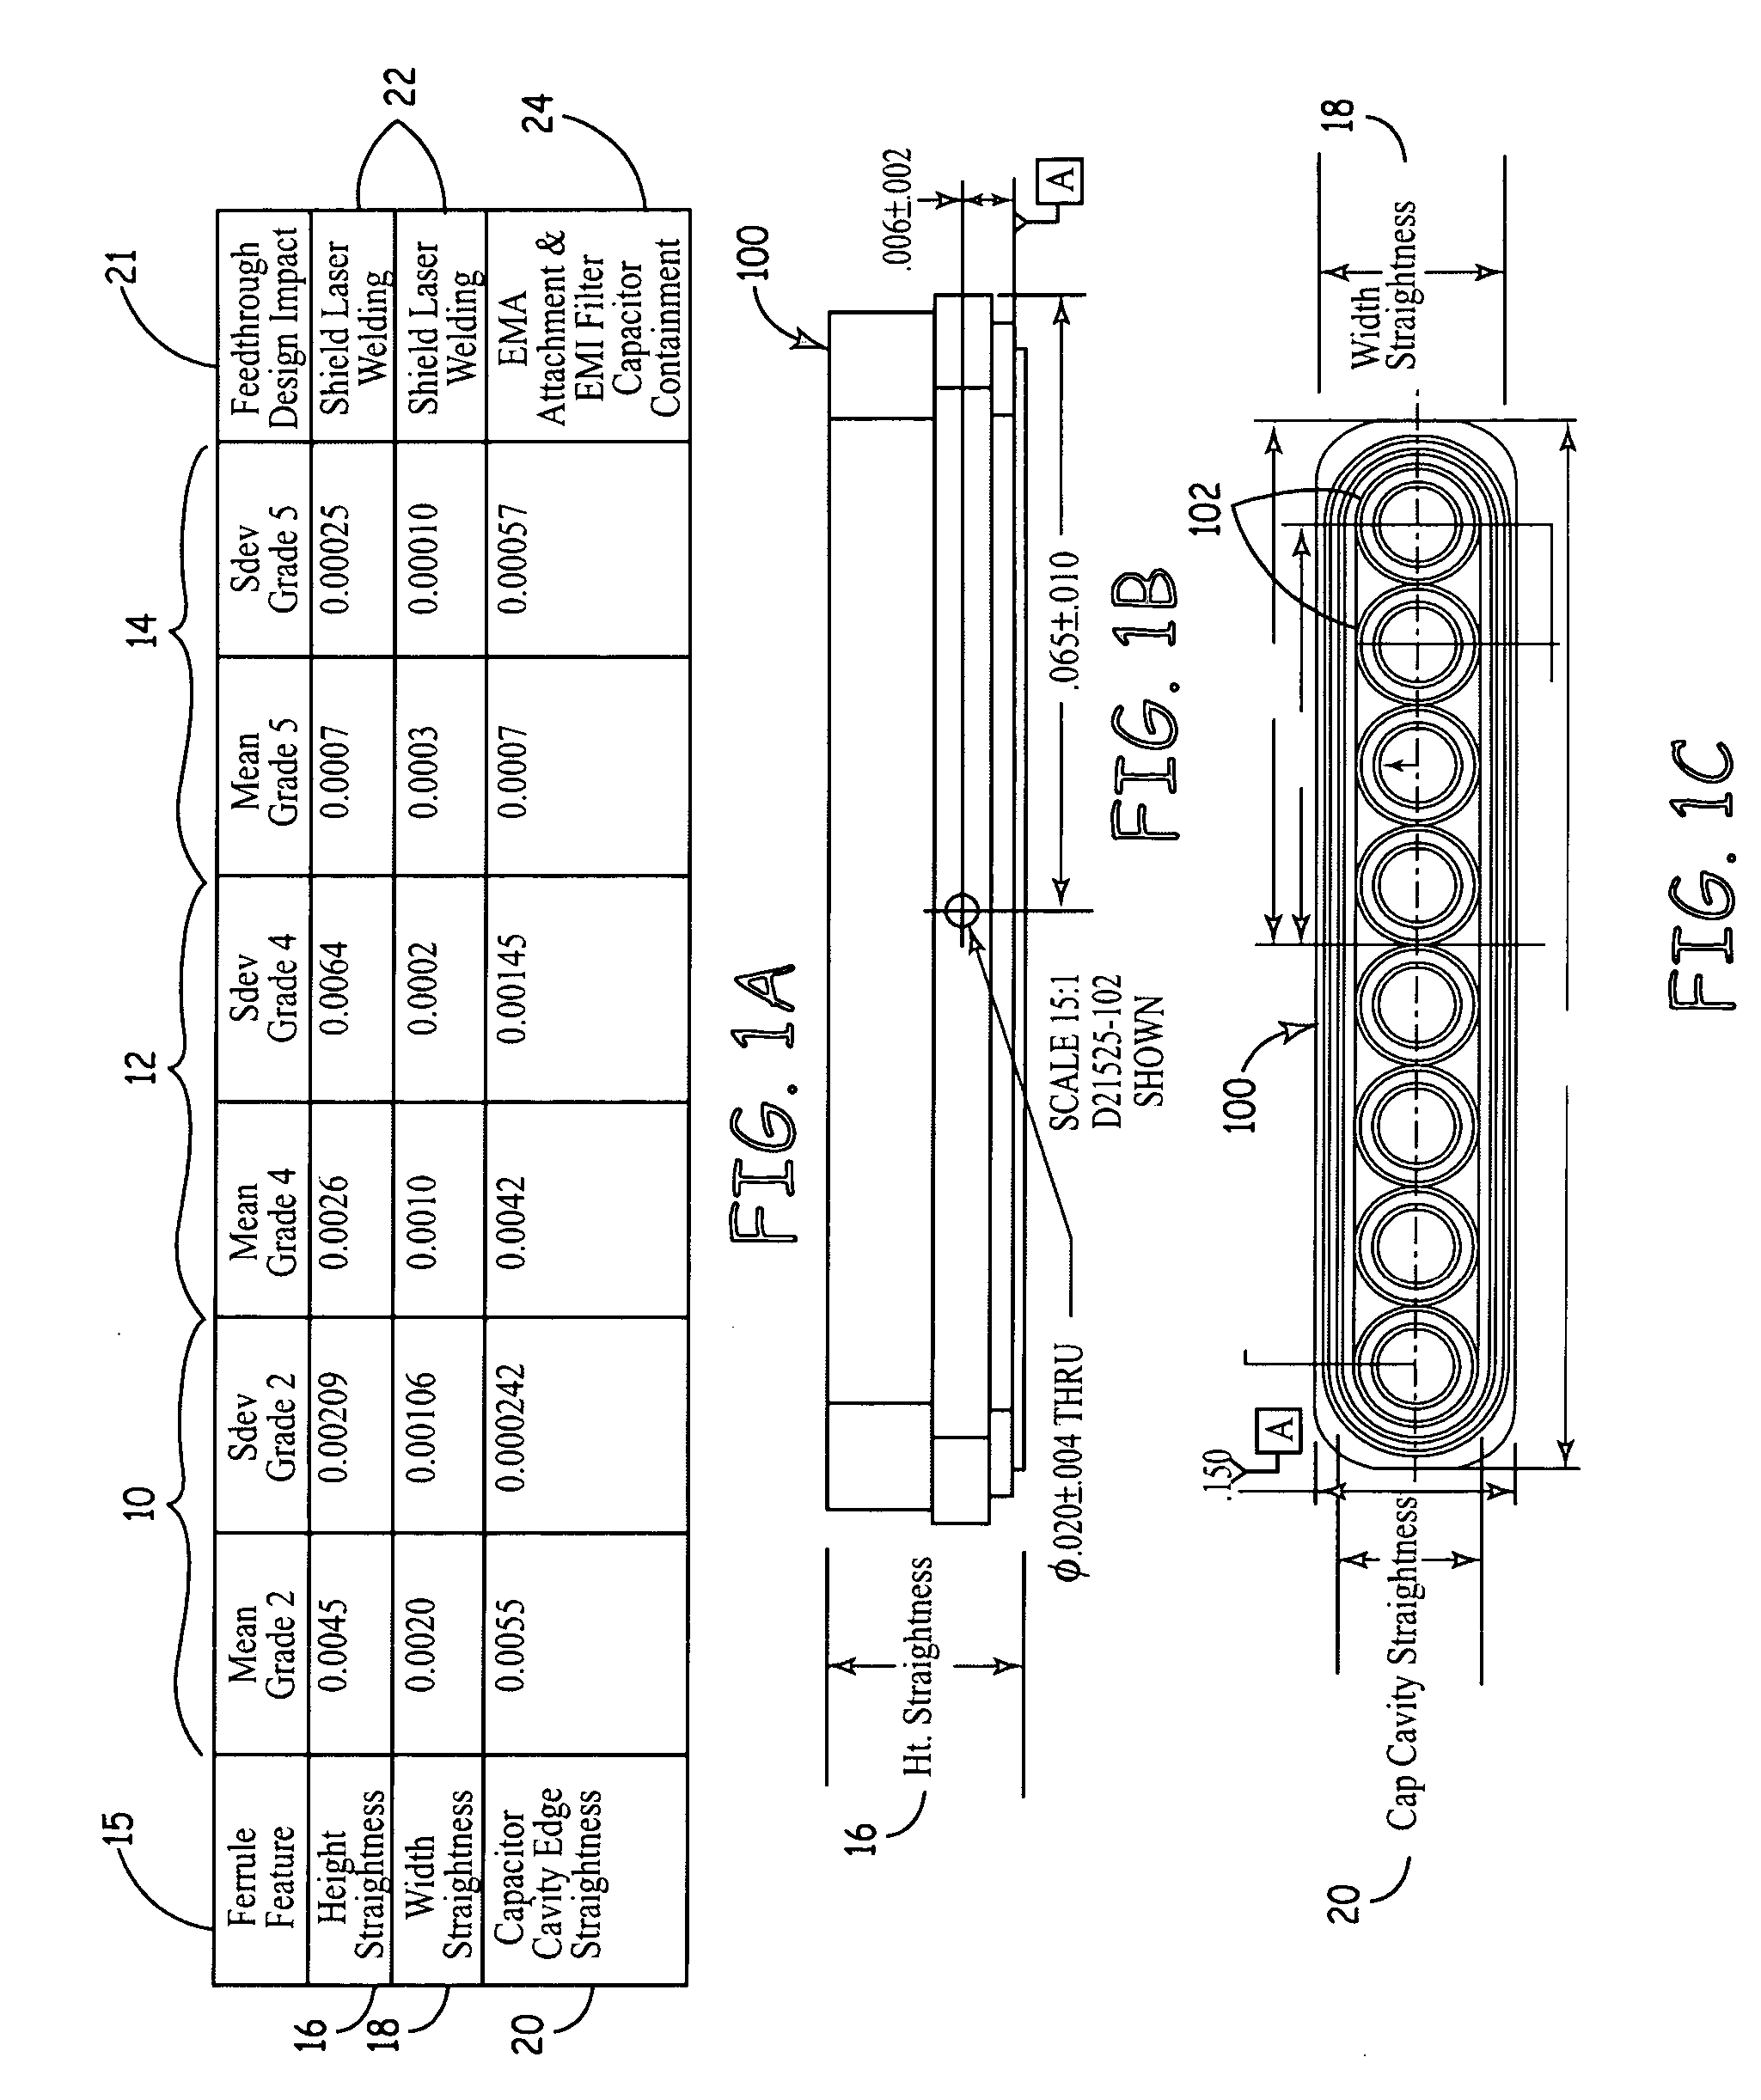 Multi-polar feedthrough array for analog communication with implantable medical device circuitry